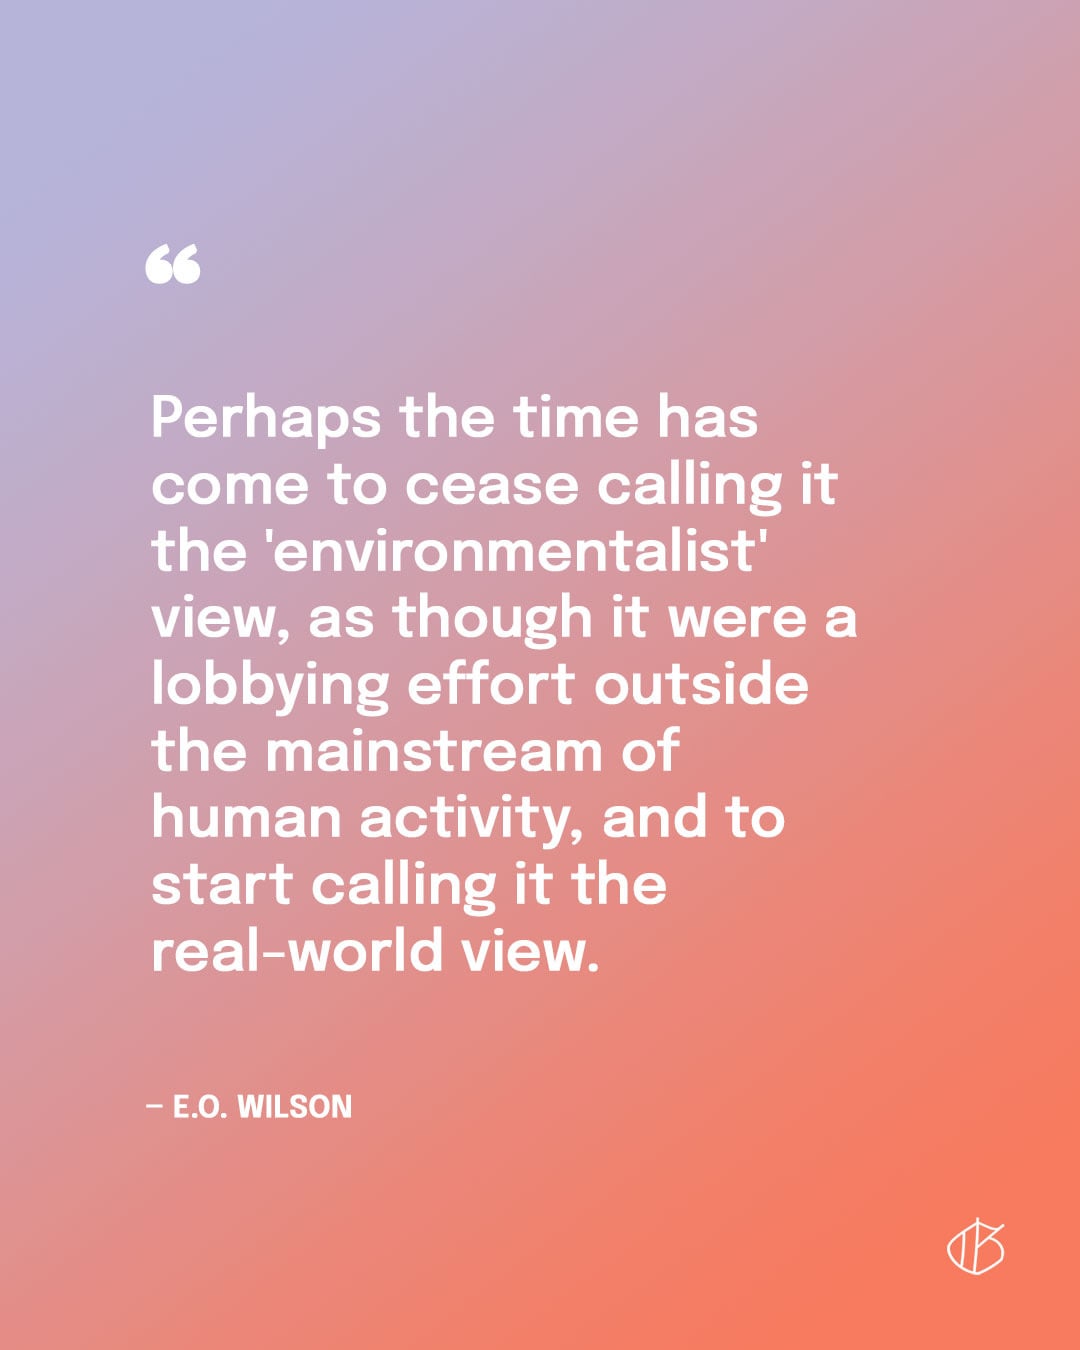 “Perhaps the time has come to cease calling it the 'environmentalist' view, as though it were a lobbying effort outside the mainstream of human activity, and to start calling it the real-world view.” — E.O. Wilson quote